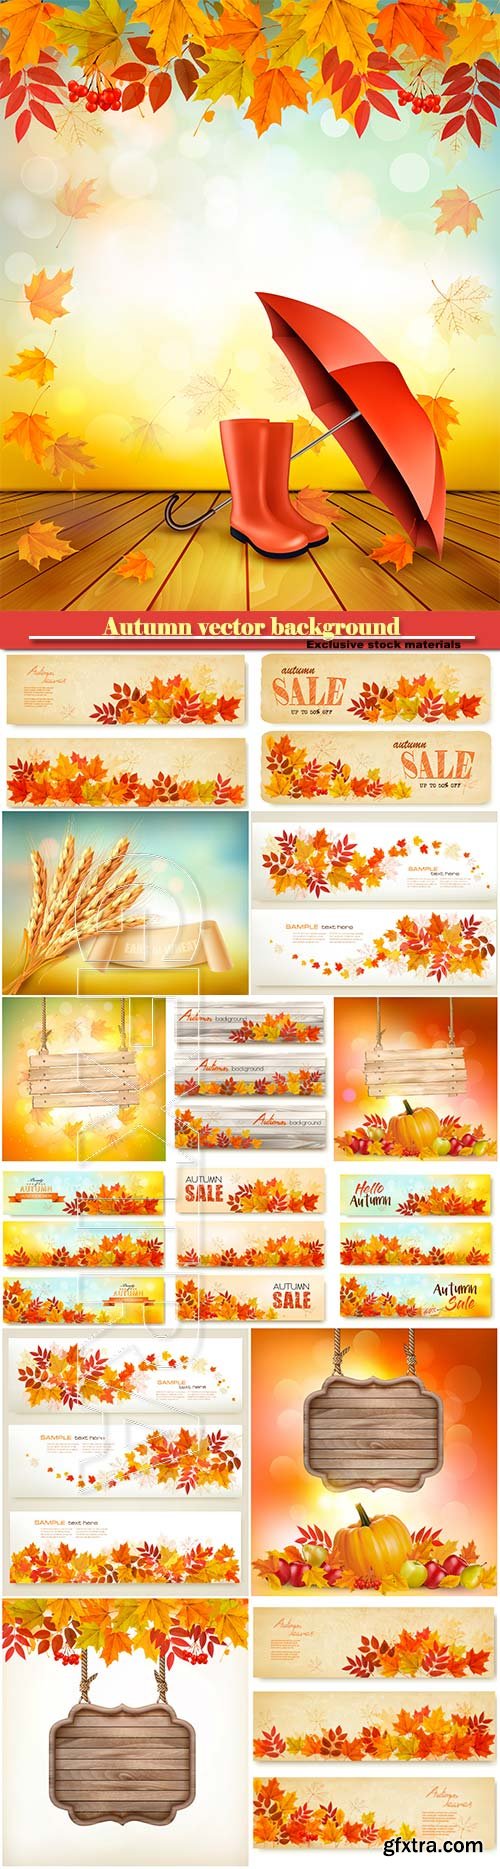 Autumn vector background with fruit and leaves, autumn sale banners